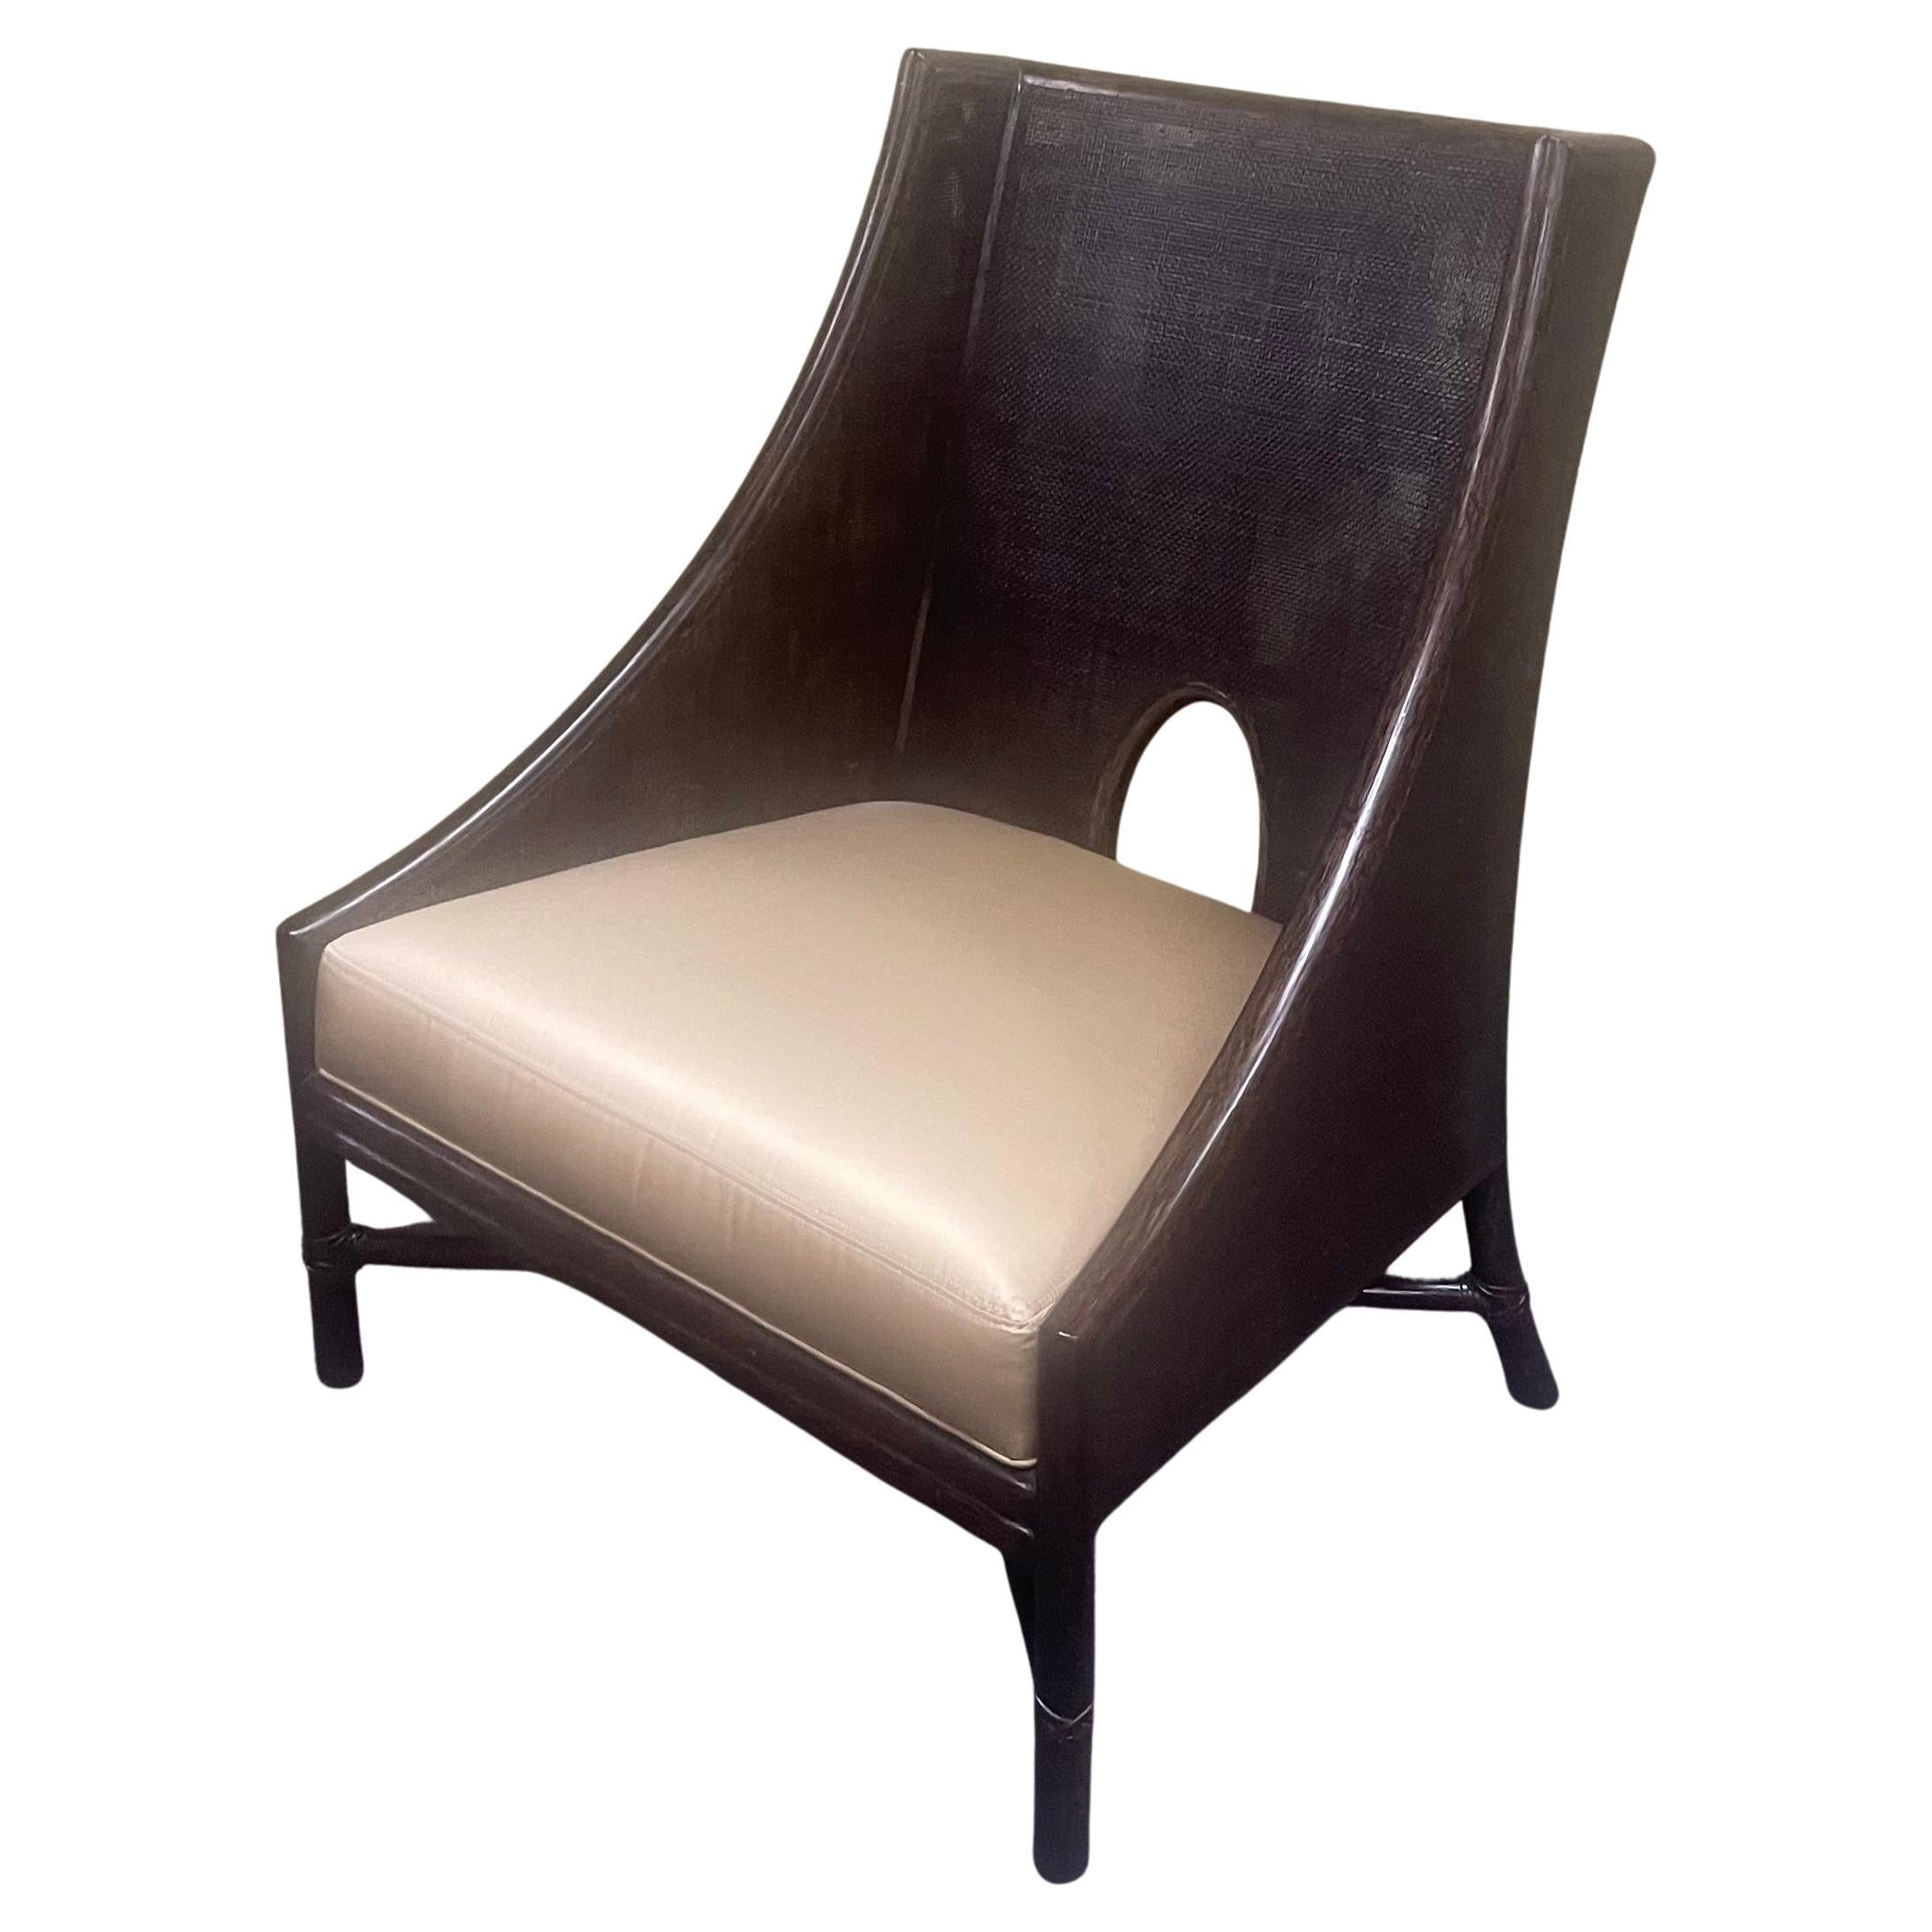 Caned Lounge Chair by Barbara Barry for McGuire